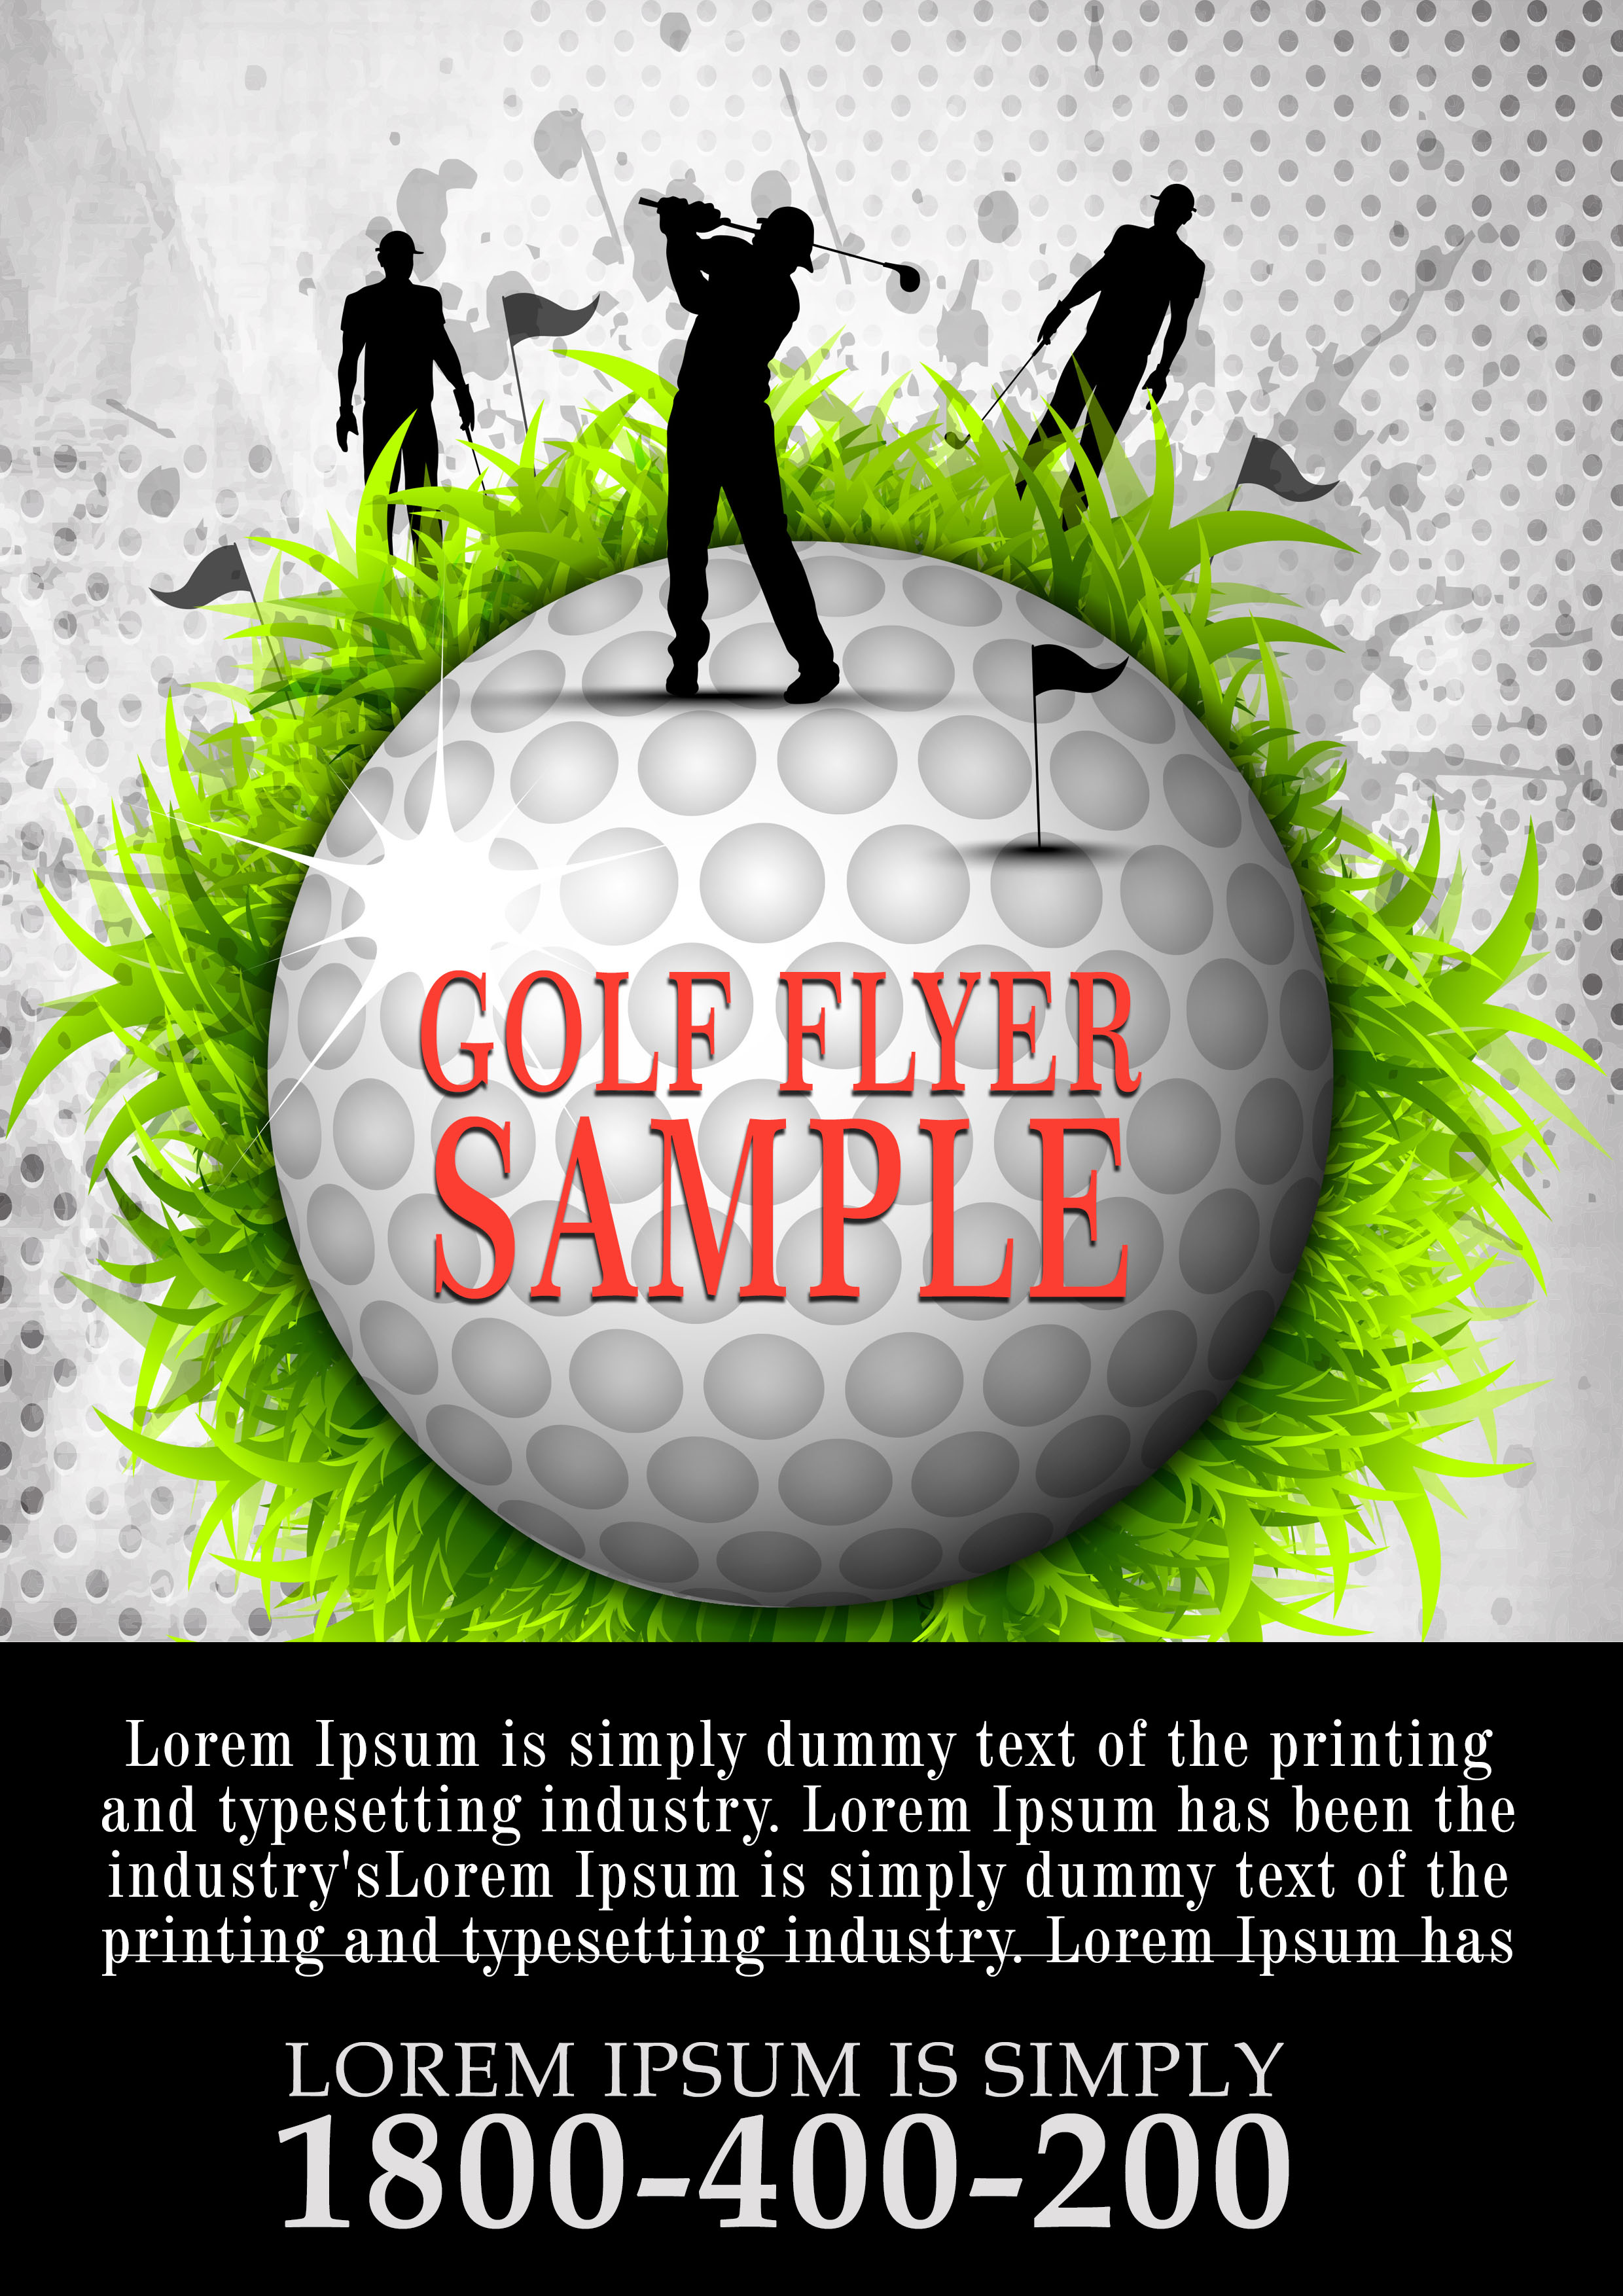 Golf Outing Flyer Template